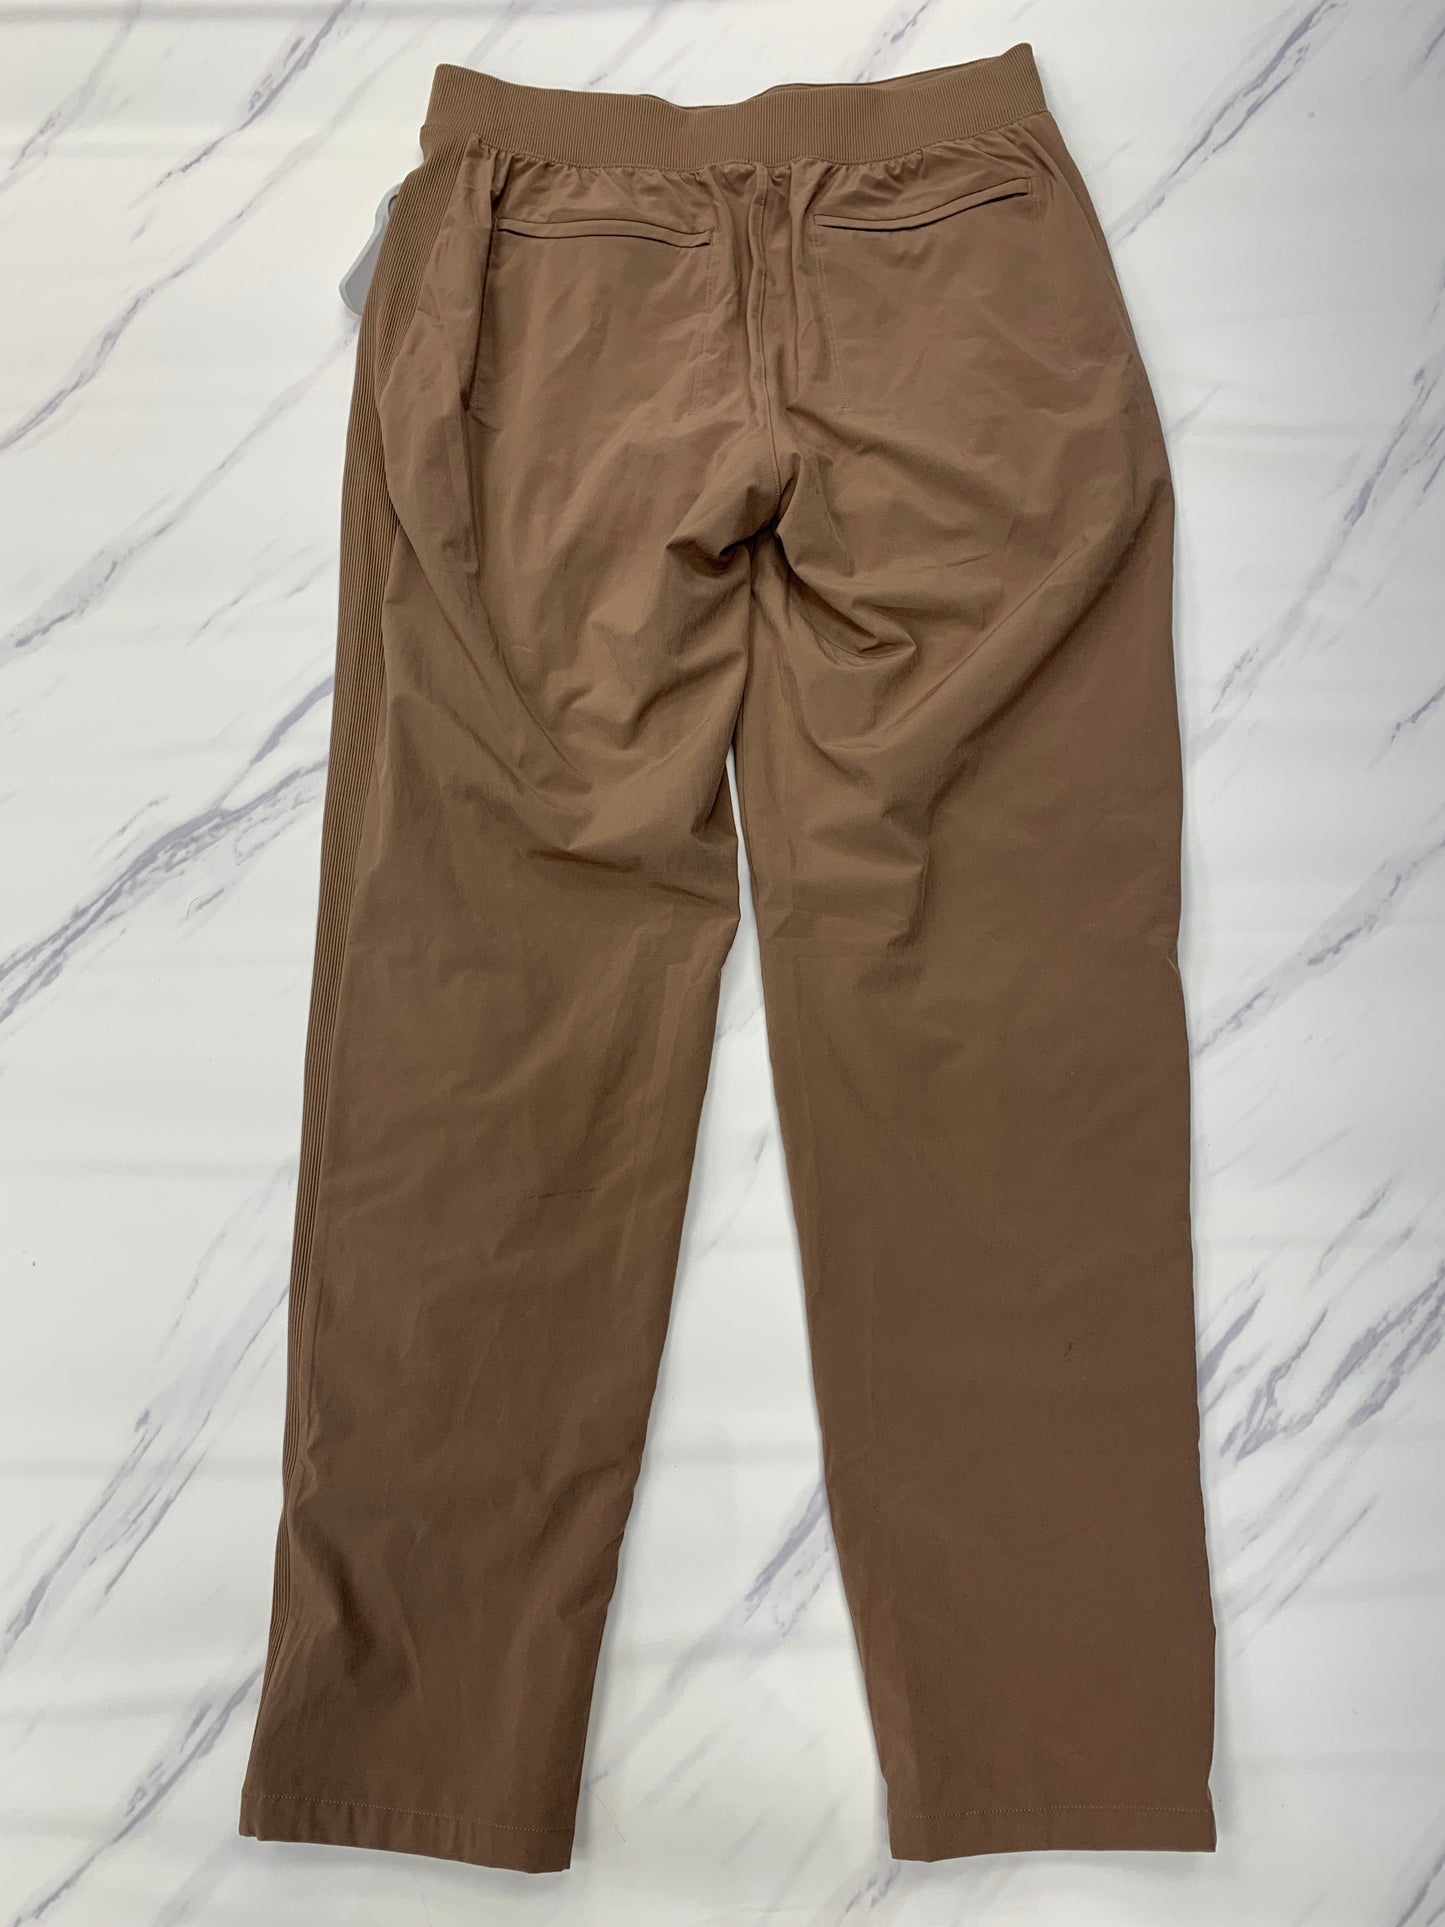 Brown Athletic Pants Athleta, Size 10tall